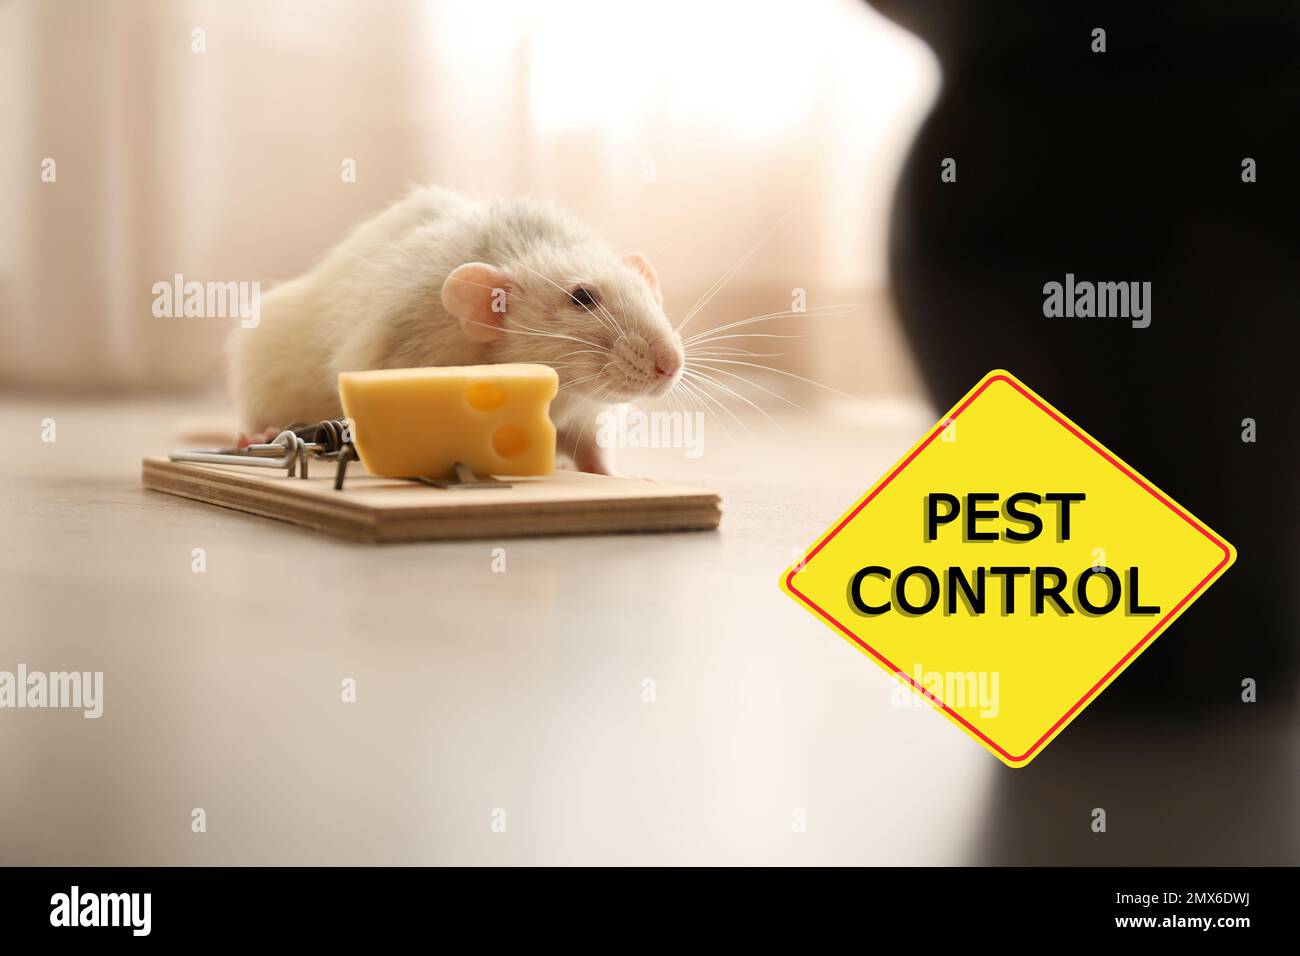 A24 Rat & Mouse Trap User Submitted Videos, Rat & Mouse Trap In Action